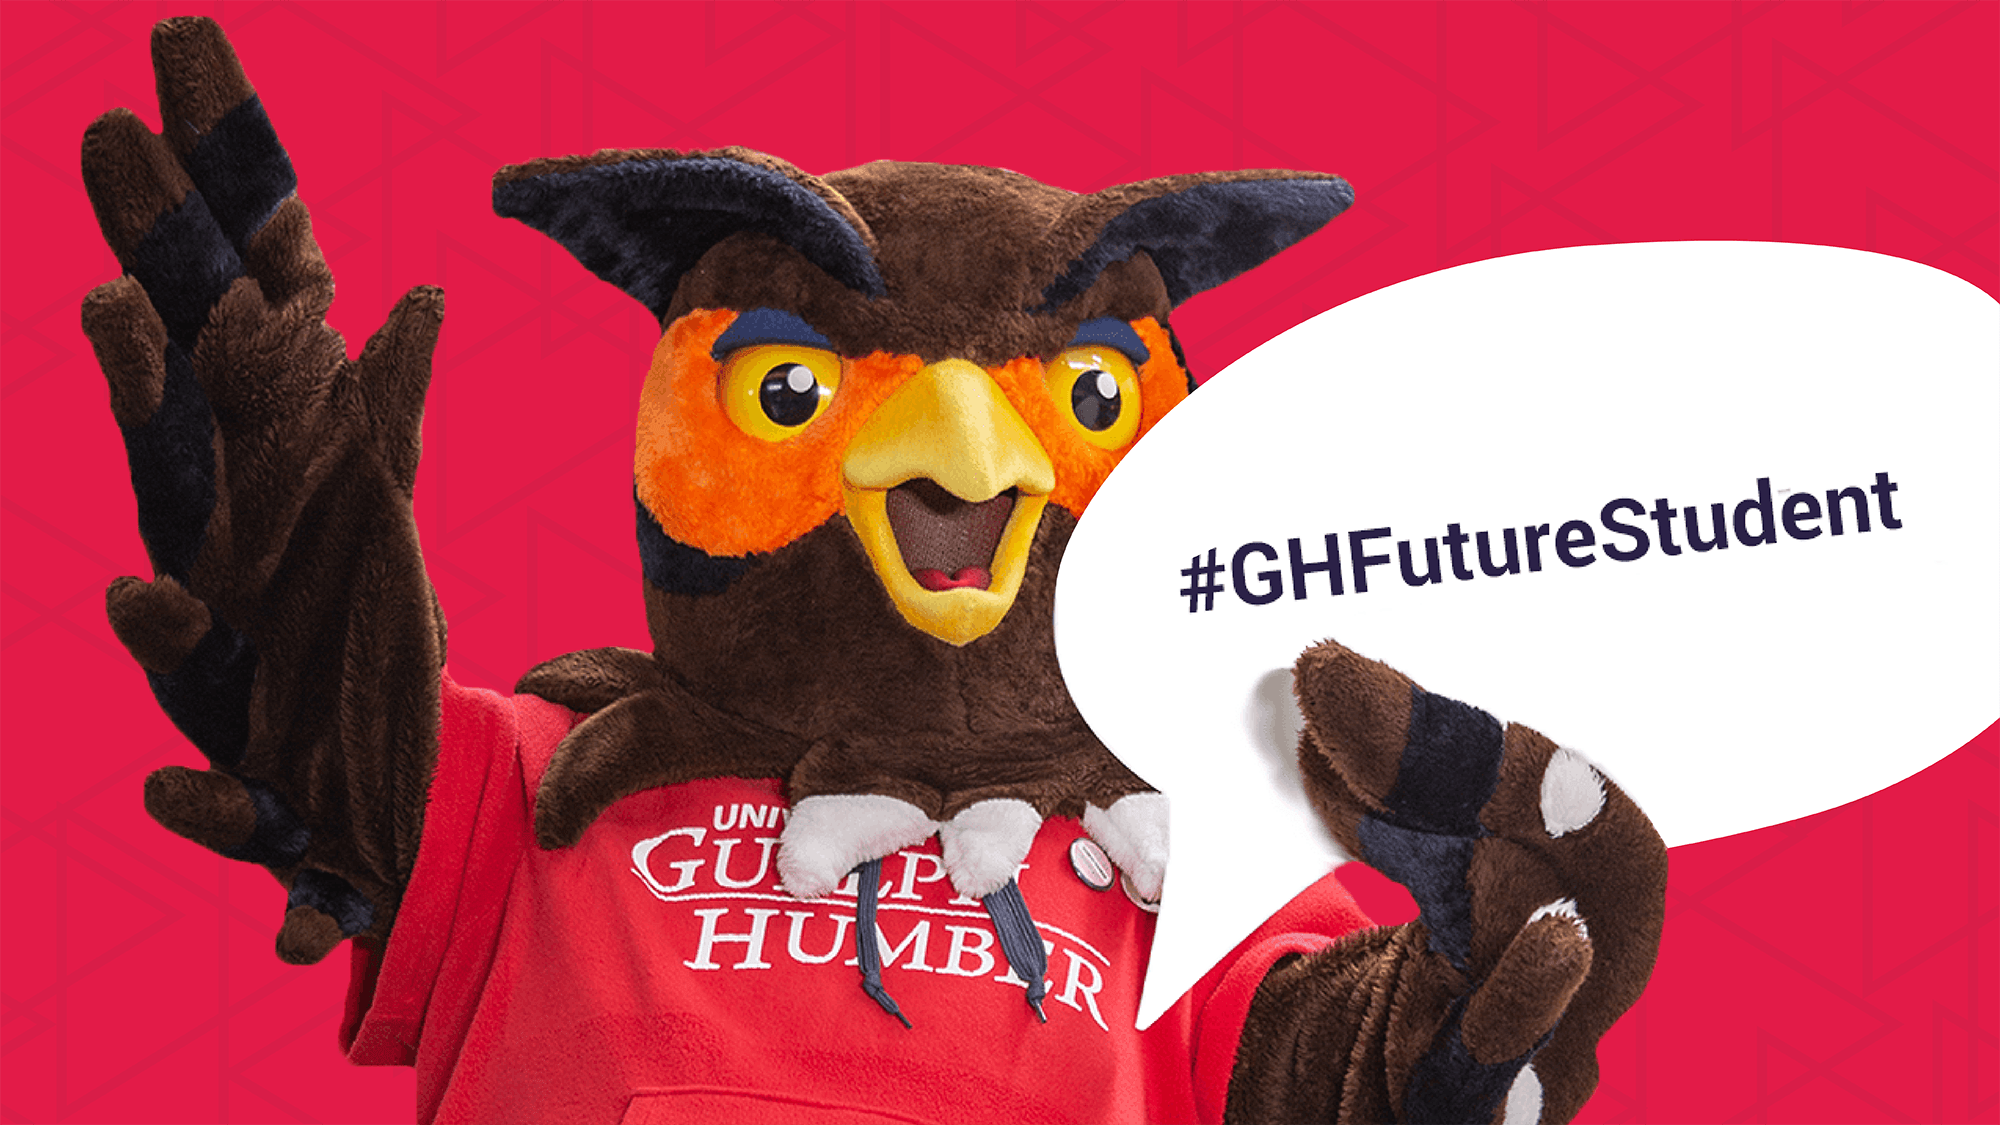 swoop with #GHFutureStudent sign